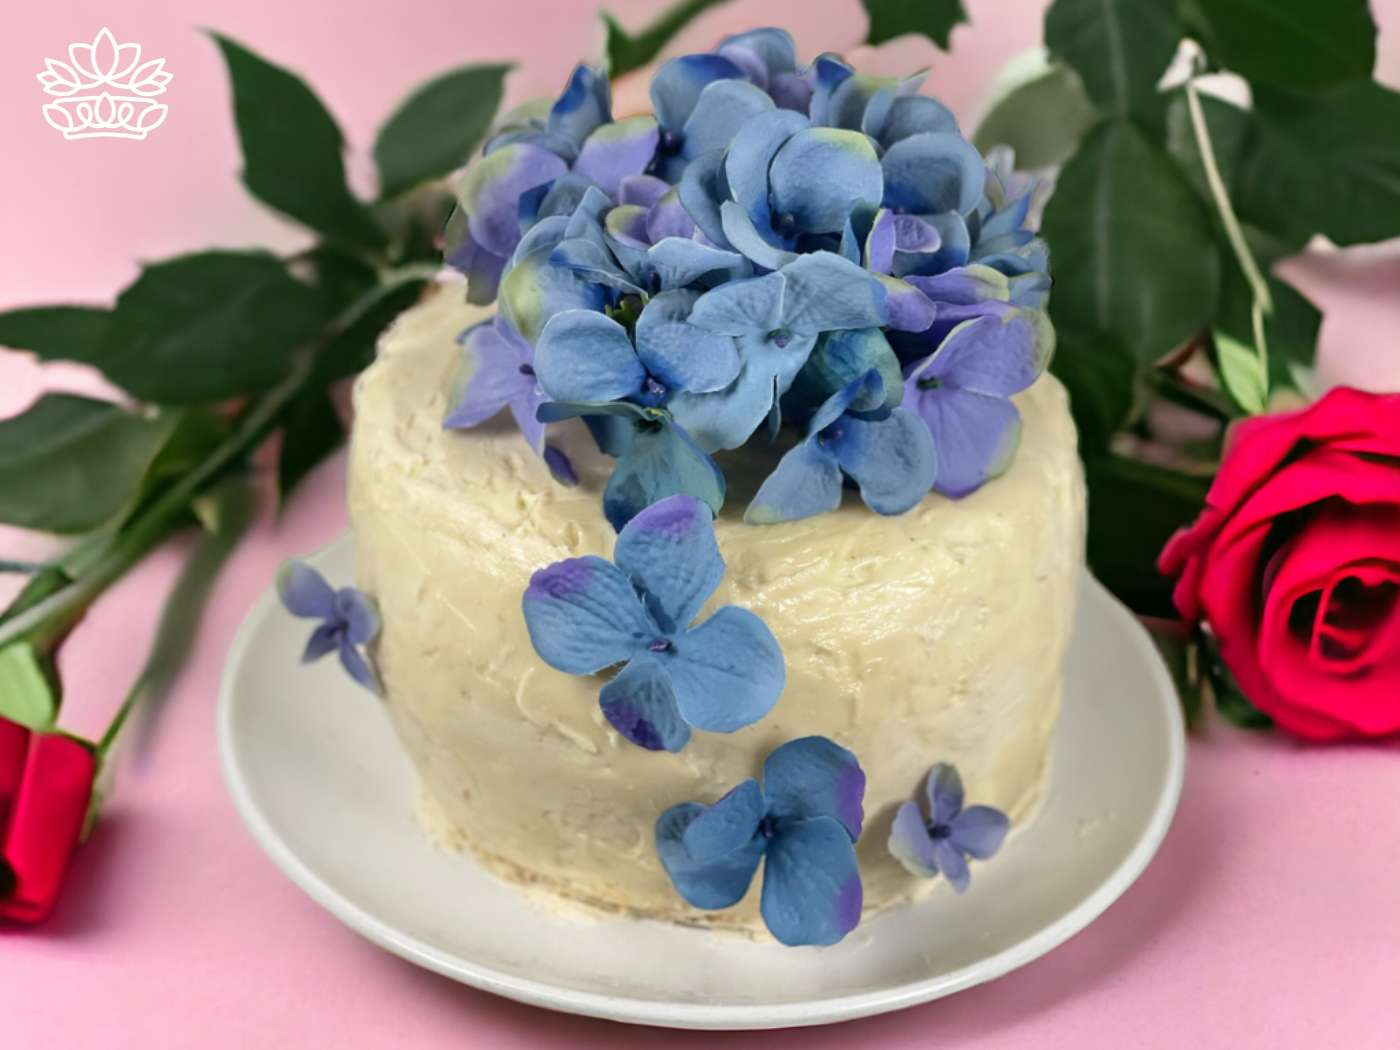 A beautifully frosted cake topped with a cluster of delicate blue hydrangeas, set against a pink background with a vivid red rose in the foreground, reflecting the artistry available at Fabulous Flowers and Gifts.